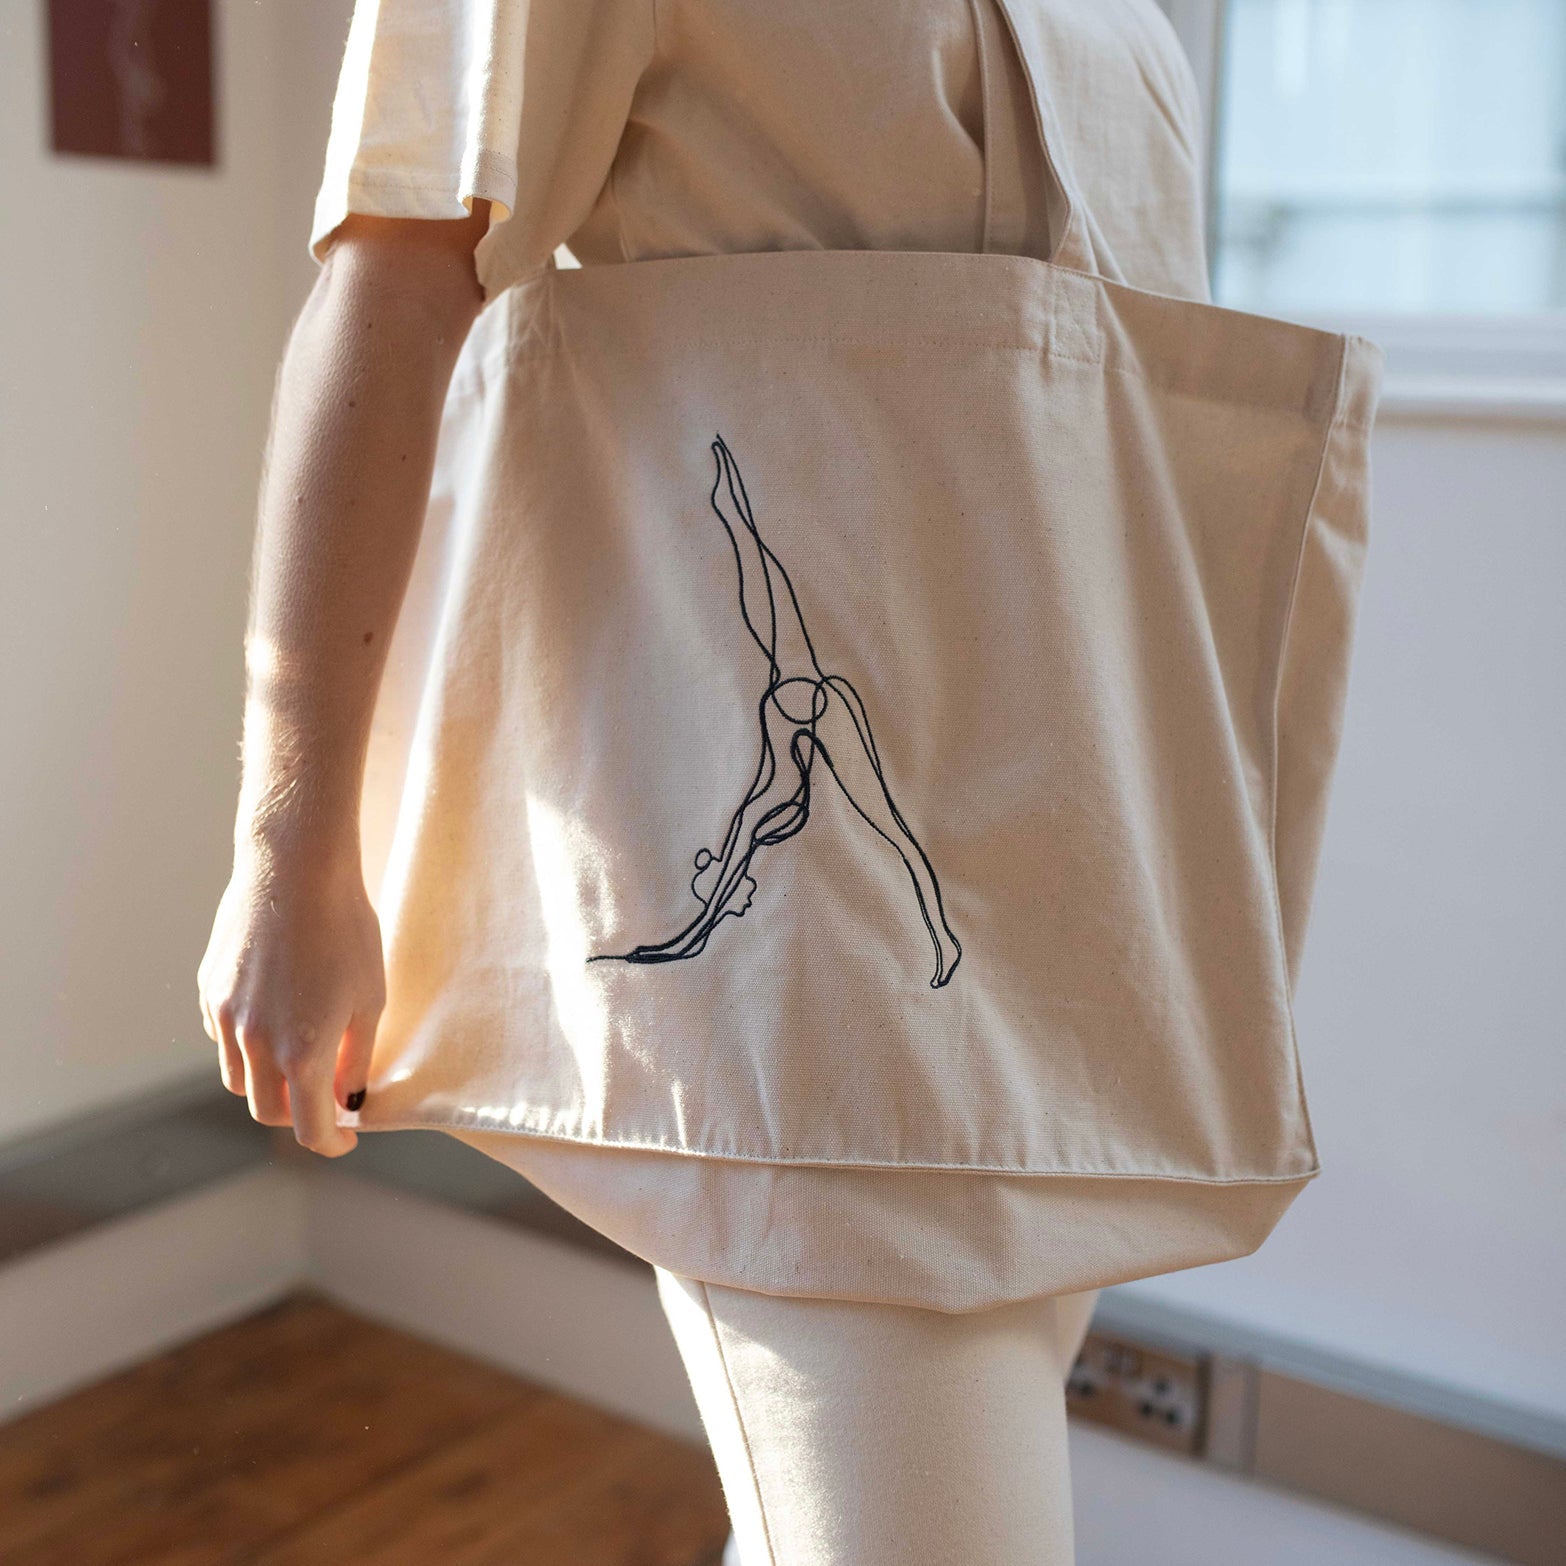 Embroidered Yoga Pose Oversized Recycled Canvas Tote Bag - Actively Conscious